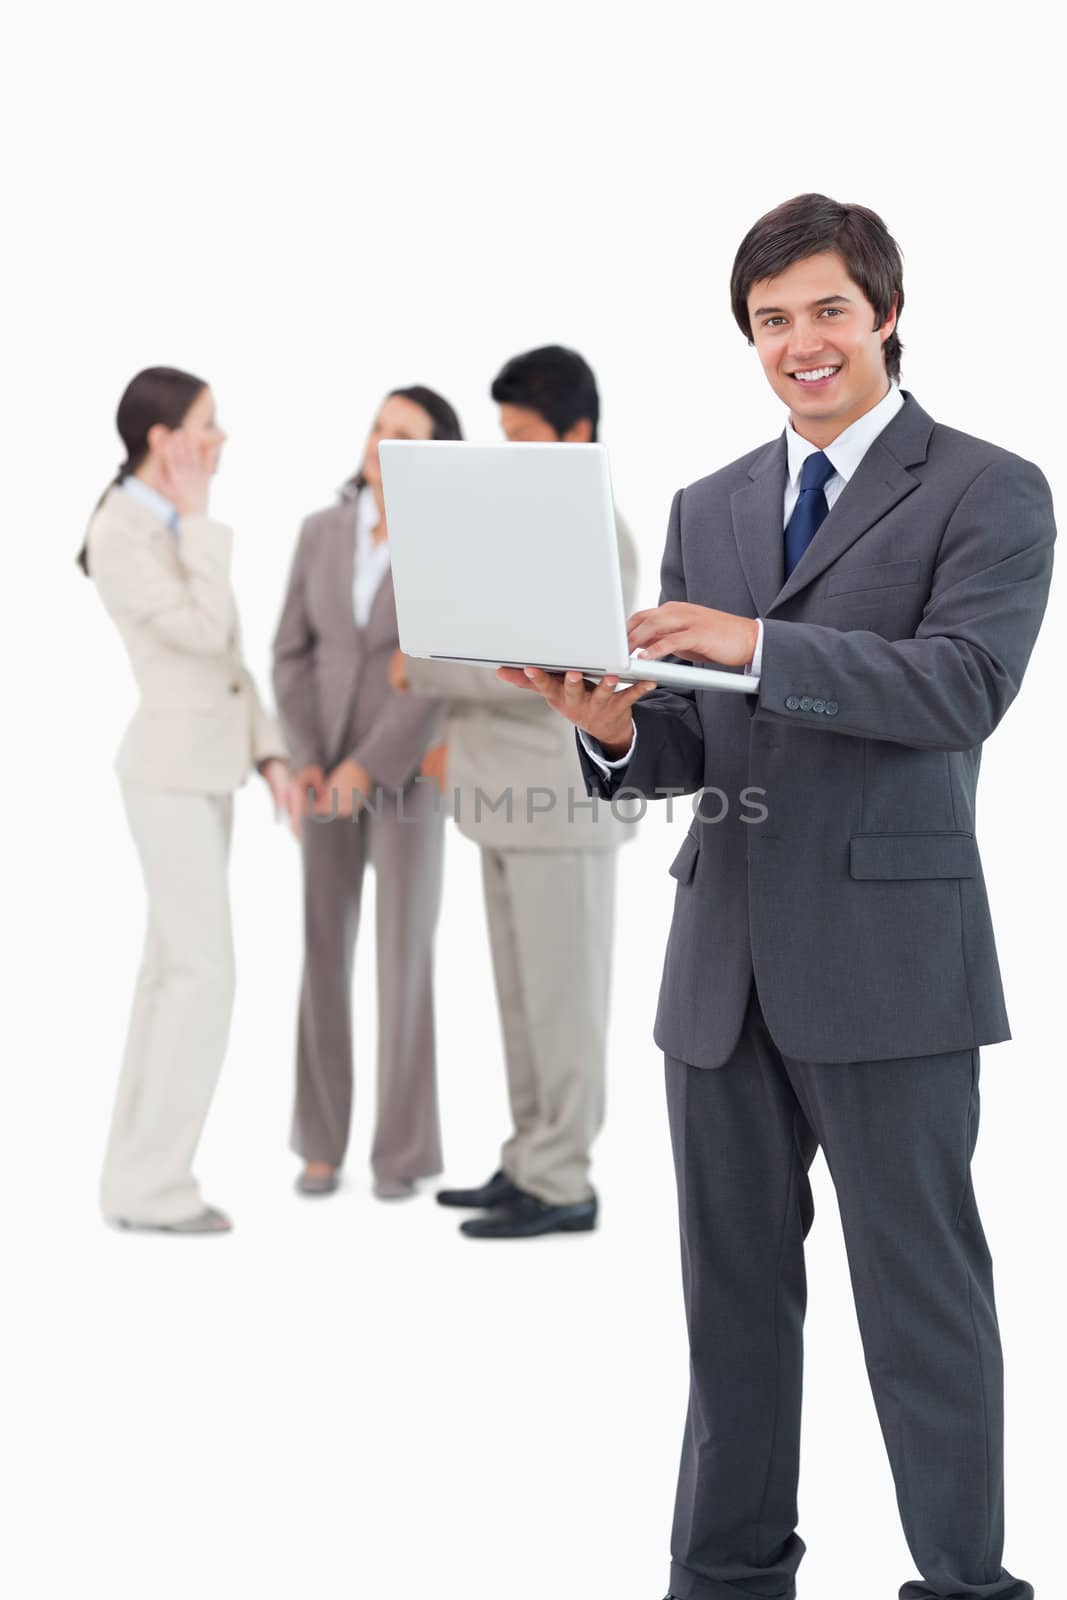 Smiling salesman with laptop and team behind him against a white background